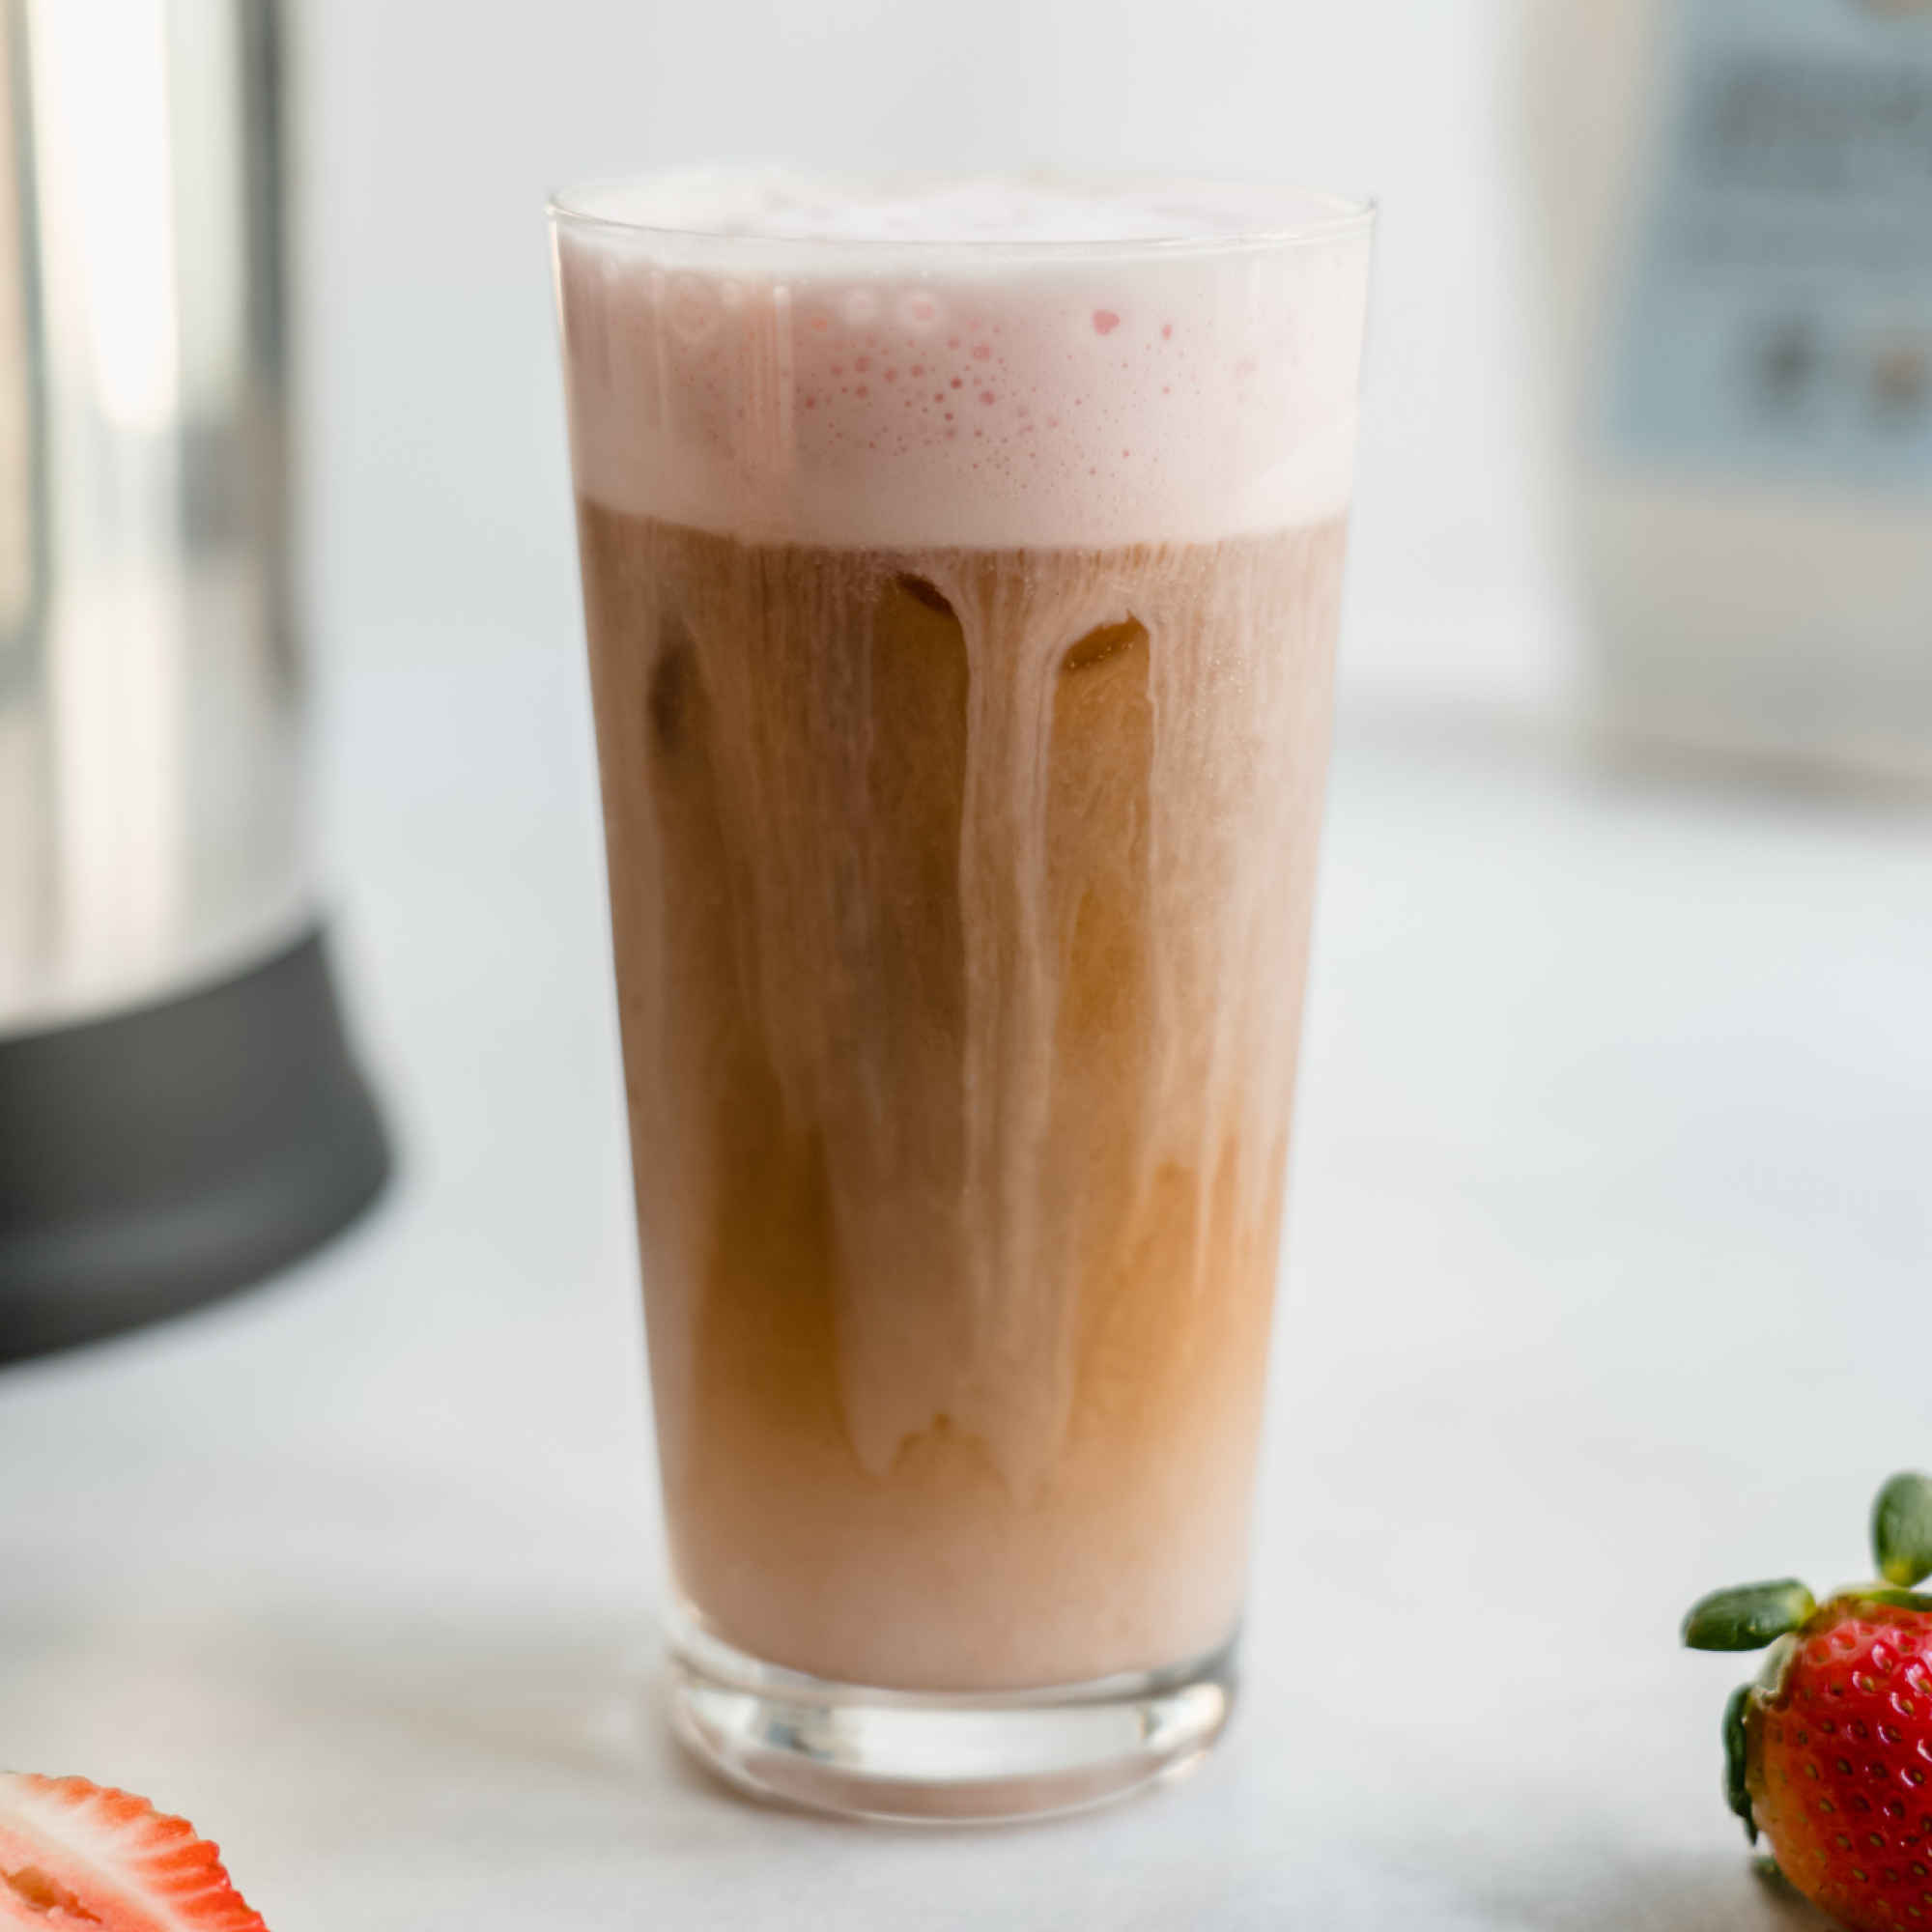 Delicious strawberry cold brew coffee, a refreshing beverage made using Almond Cow almond milk machine